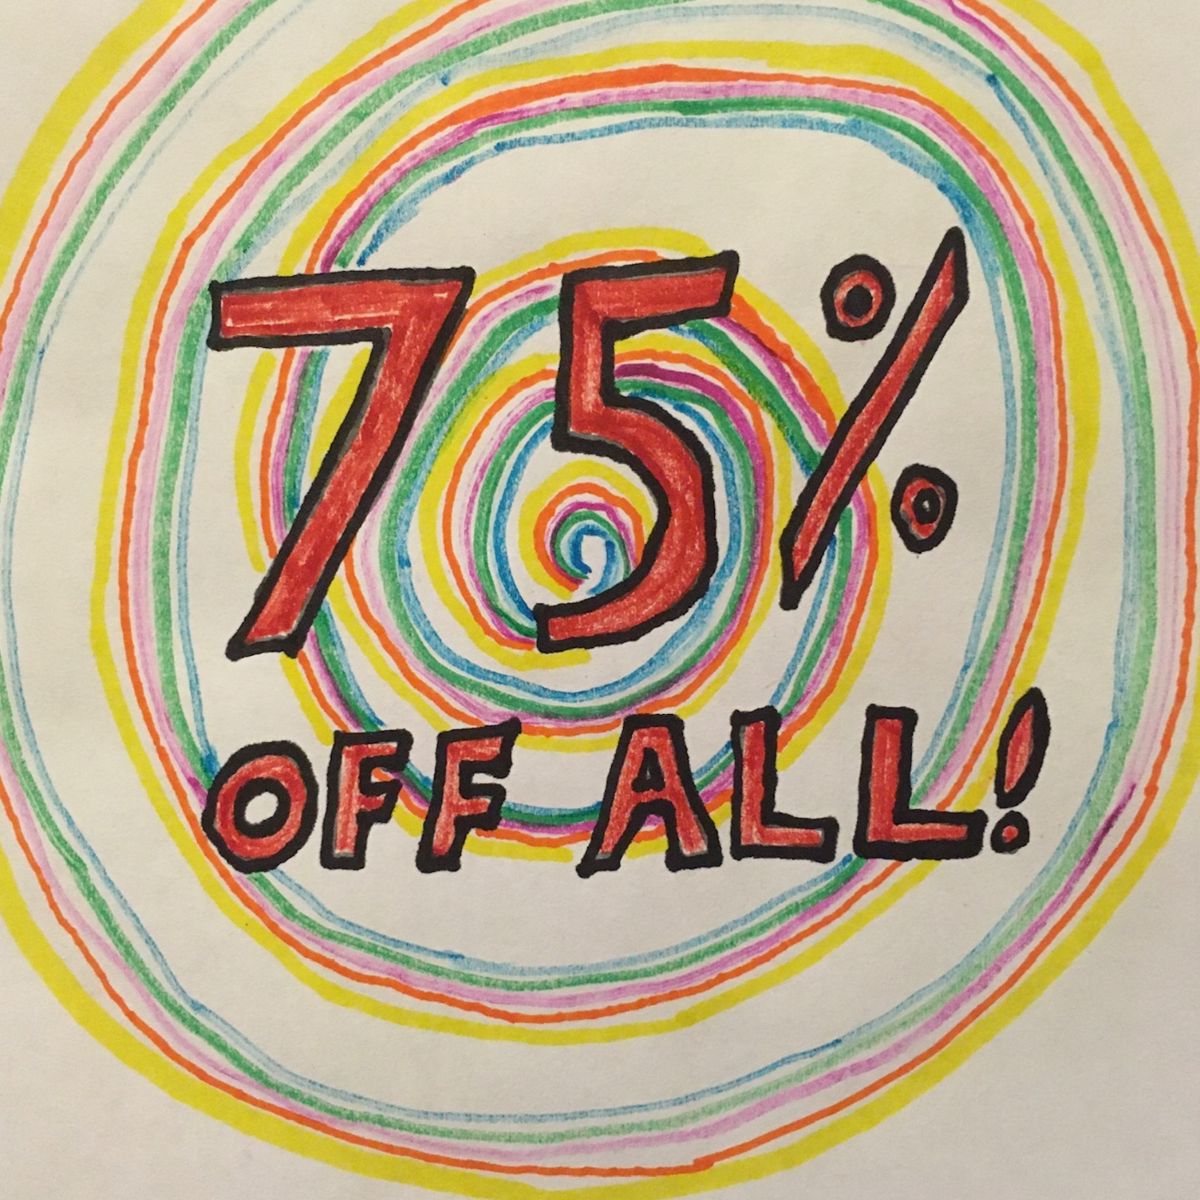 75% off everything that remains in the house Sunday from 1 to 3!…
Also, Bring bags and boxes… We may do “fill a bag” (normal grocery store size) for $5 in the garage!